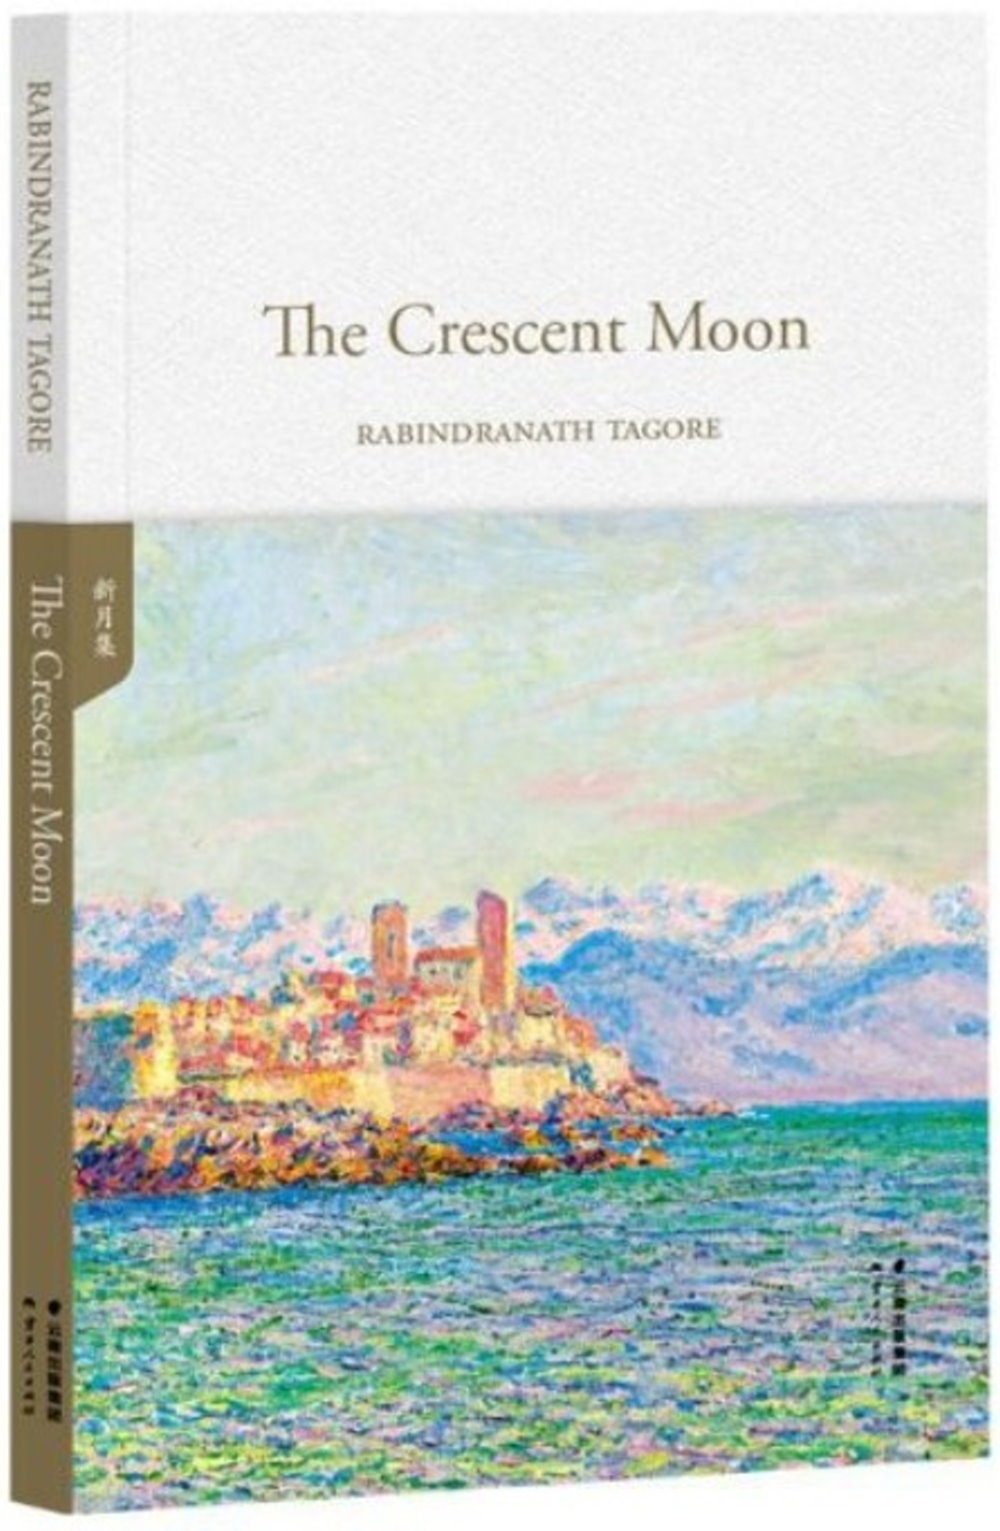 The Crescent Moon